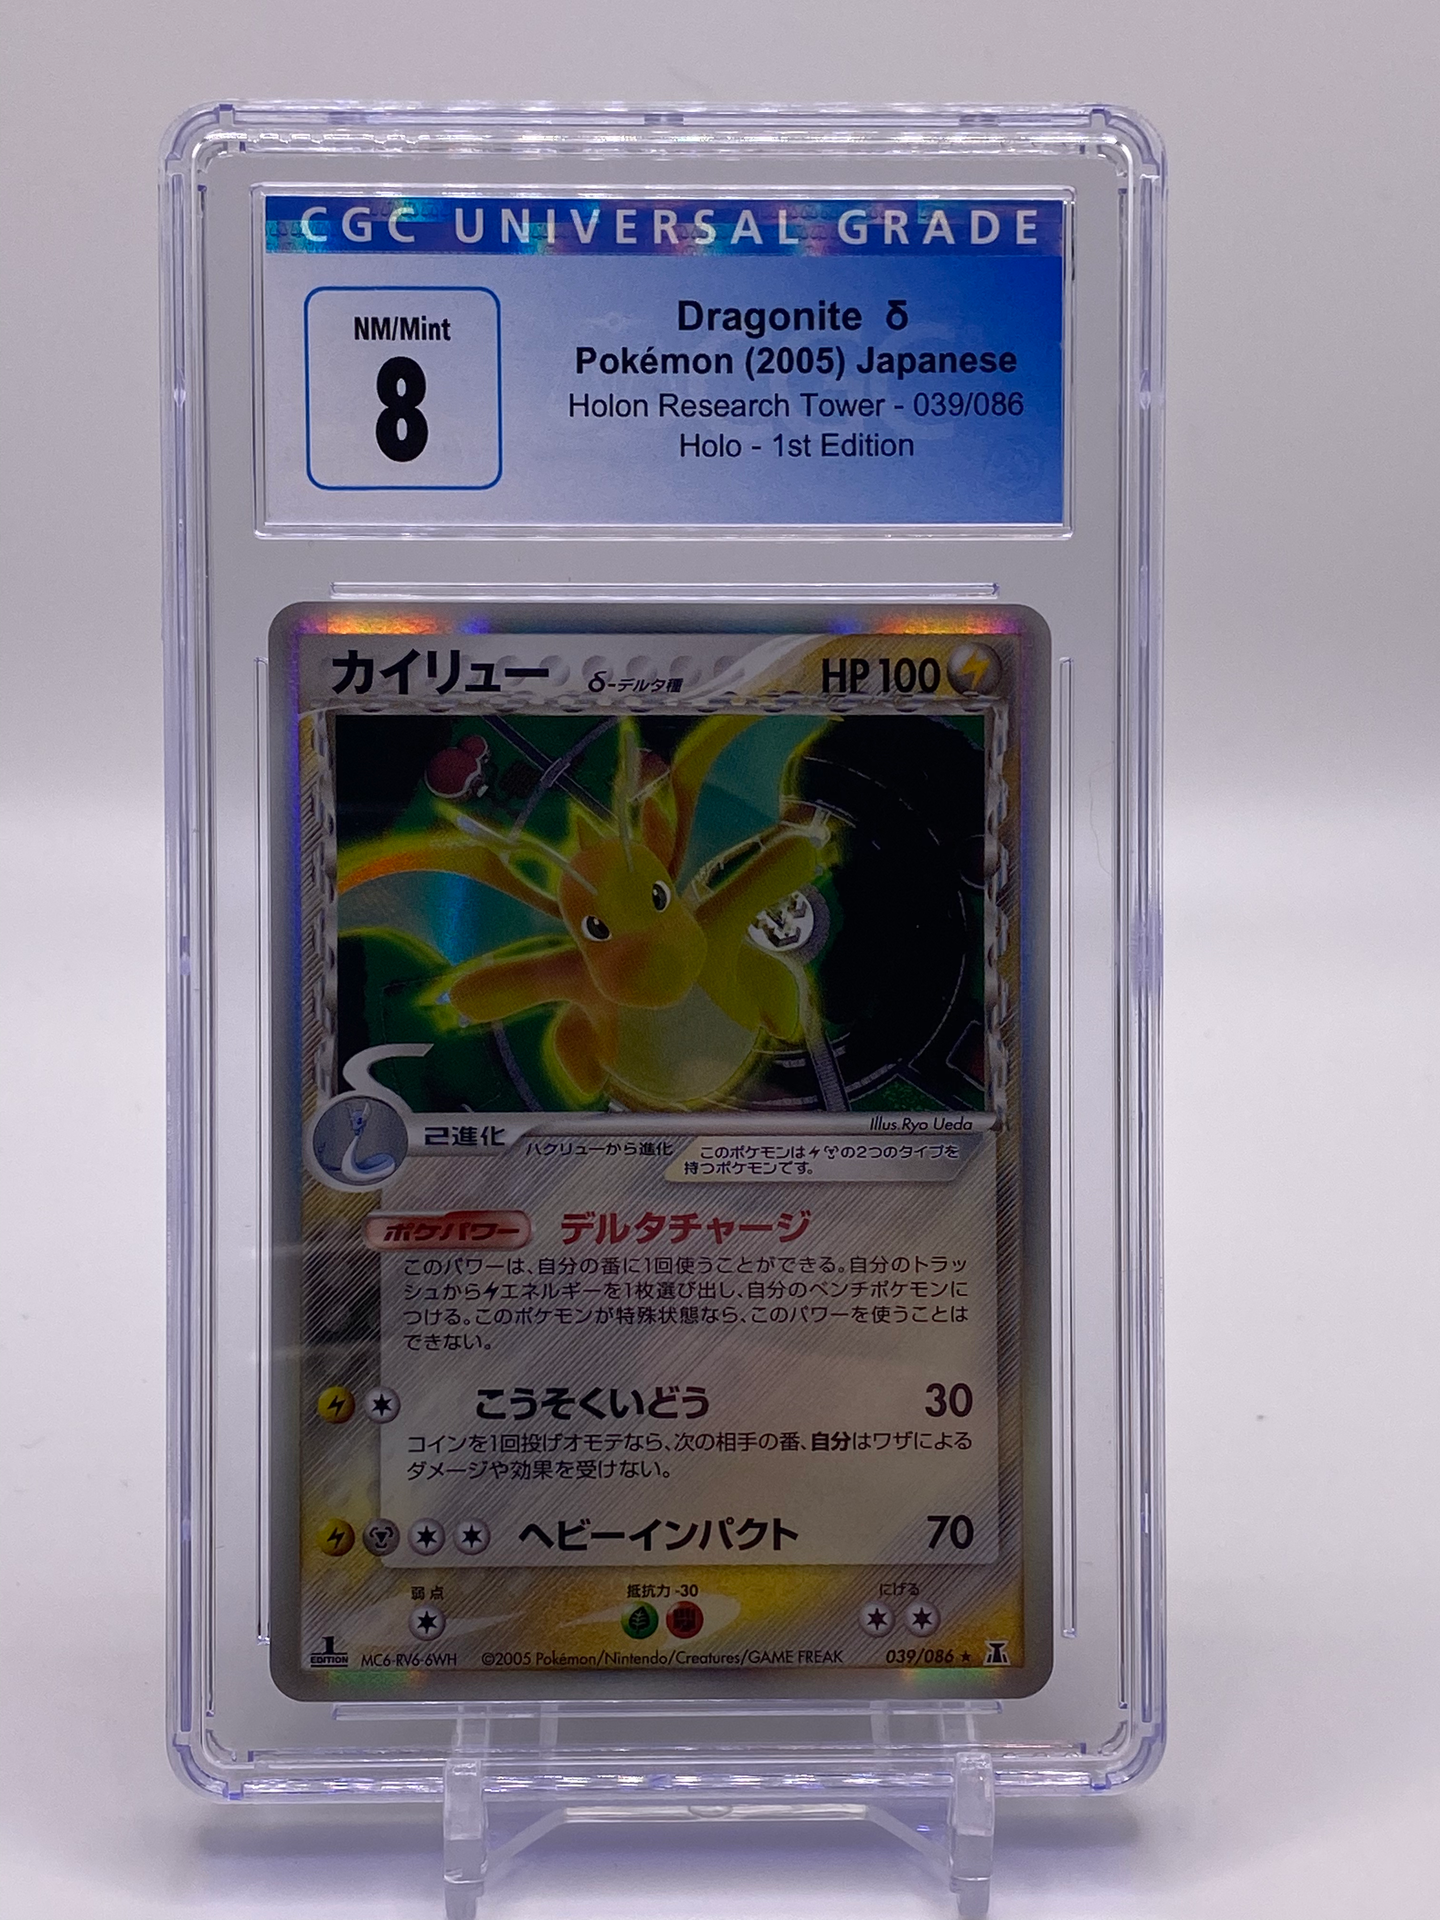 CGC 8 Japanese 1st Edition Dragonite Delta Species Holo (Graded Card)